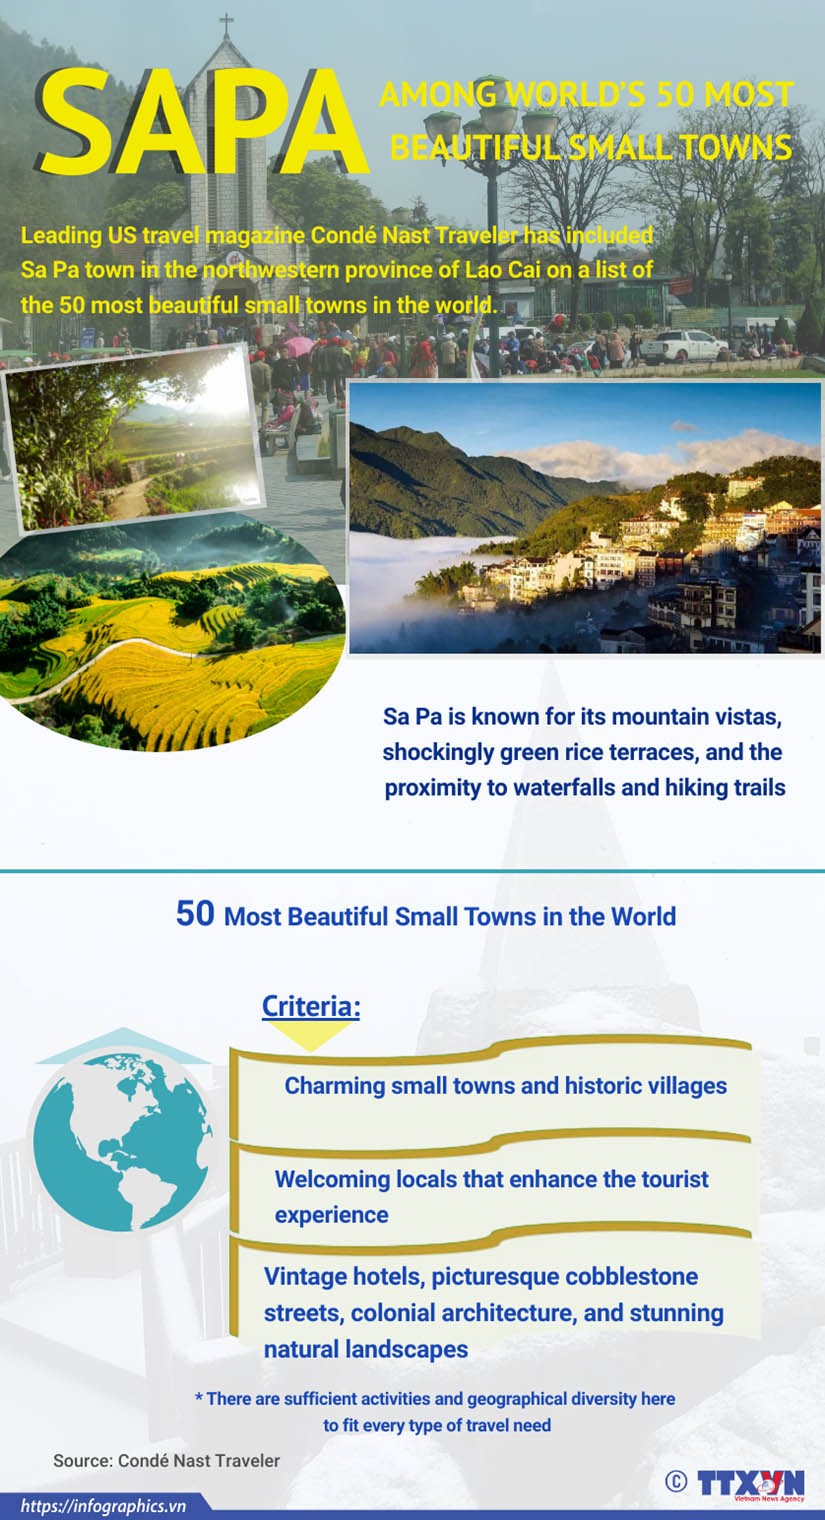 Leading US travel magazine Condé Nast Traveler has included Sa Pa town in the northwestern province of Lao Cai on a list of the 50 most beautiful small towns in the world. (Source: VNA)